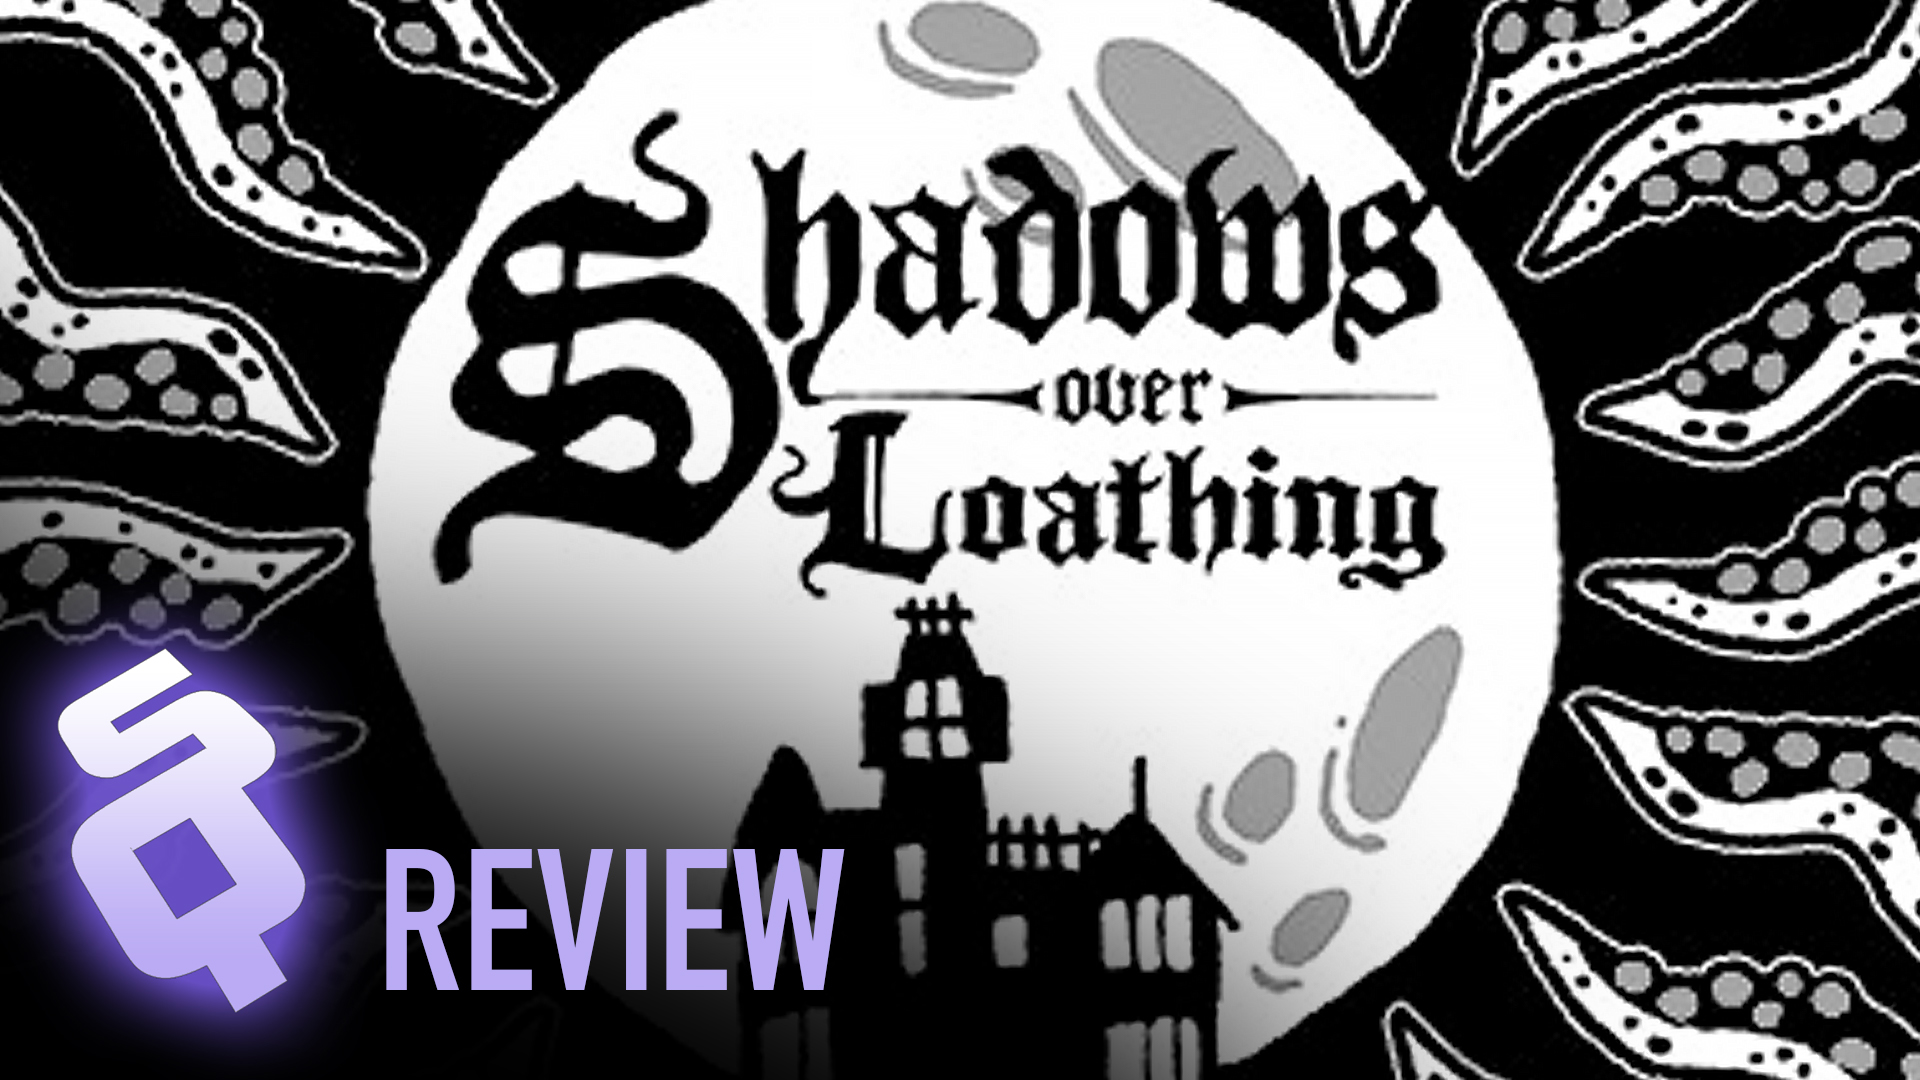 Shadows Over Loathing review